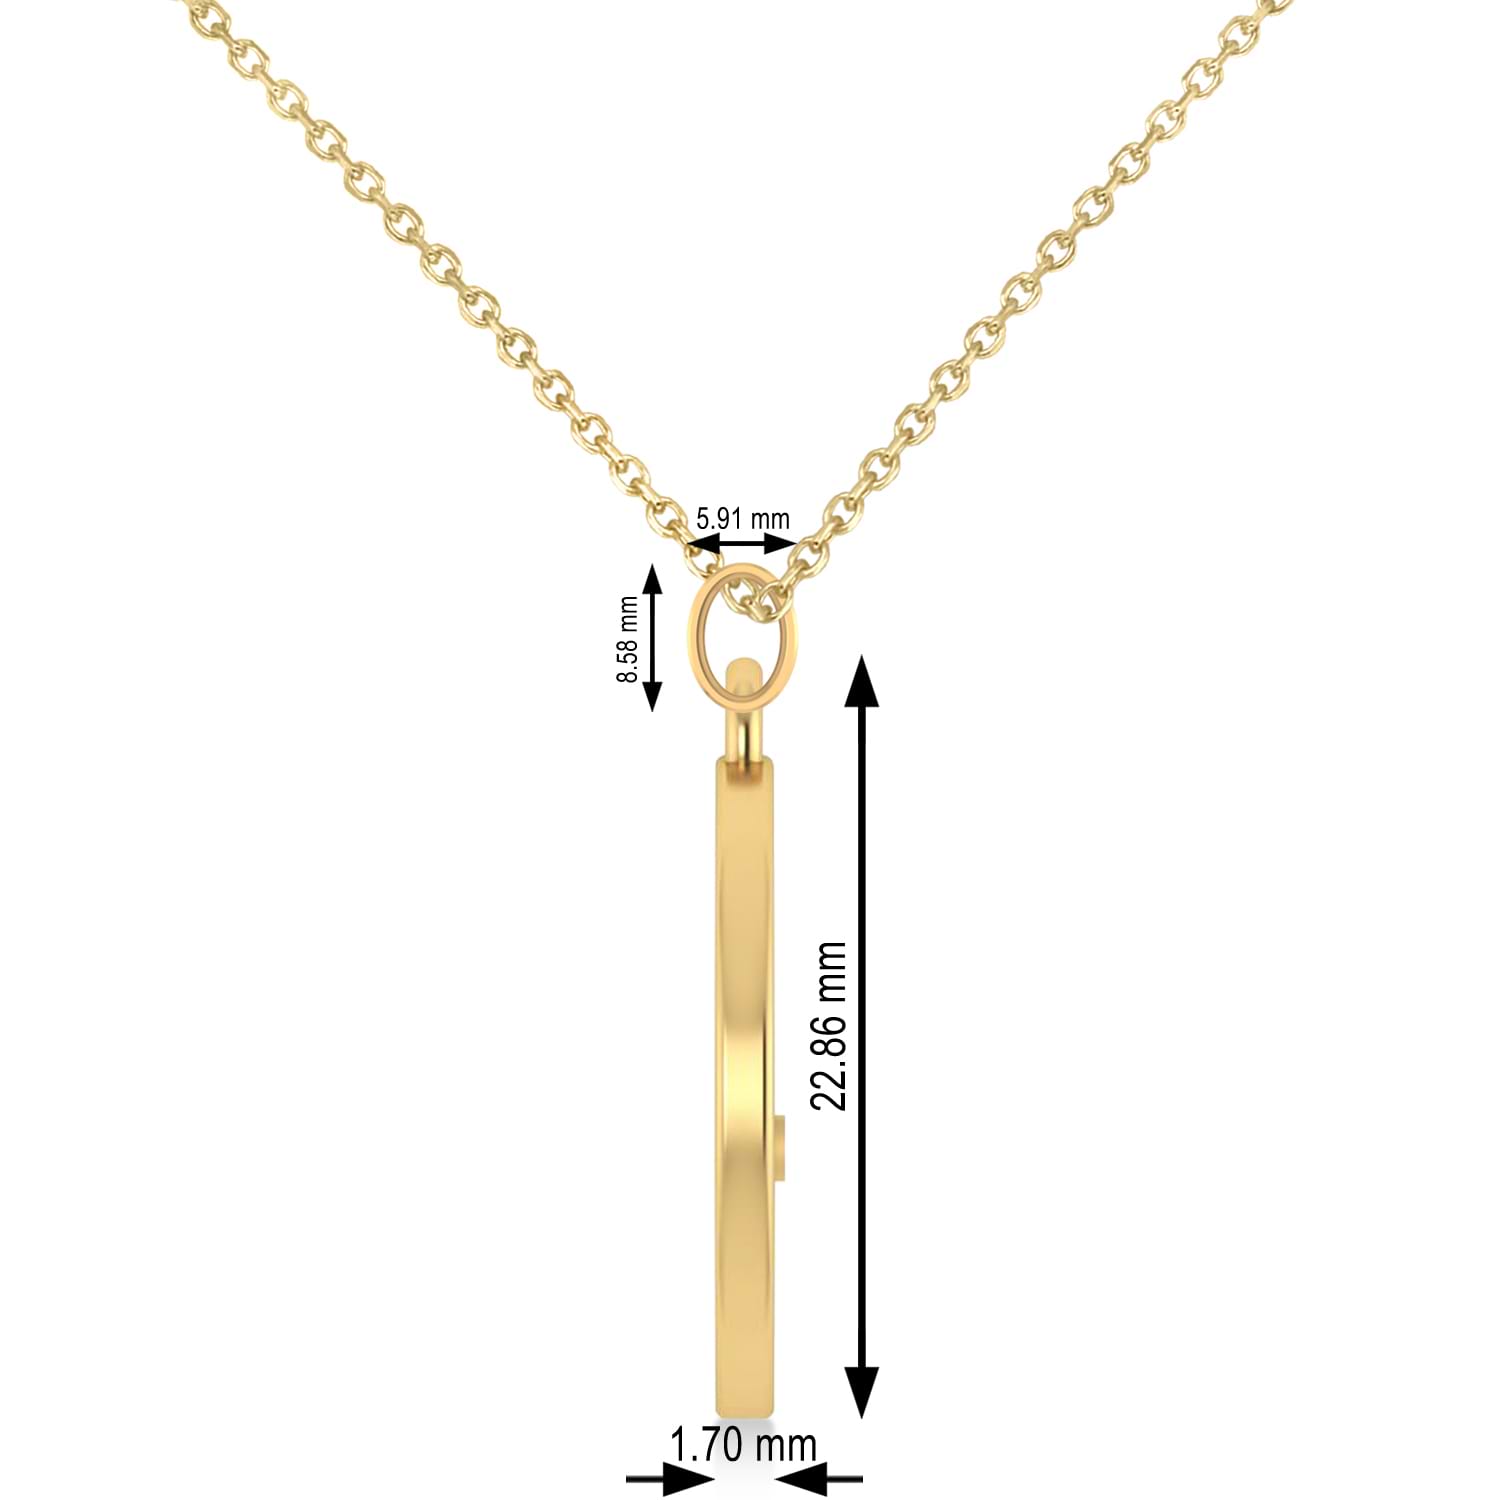 Cryptocurrency Dogecoin Pendant Necklace With Bail 14k Yellow Gold